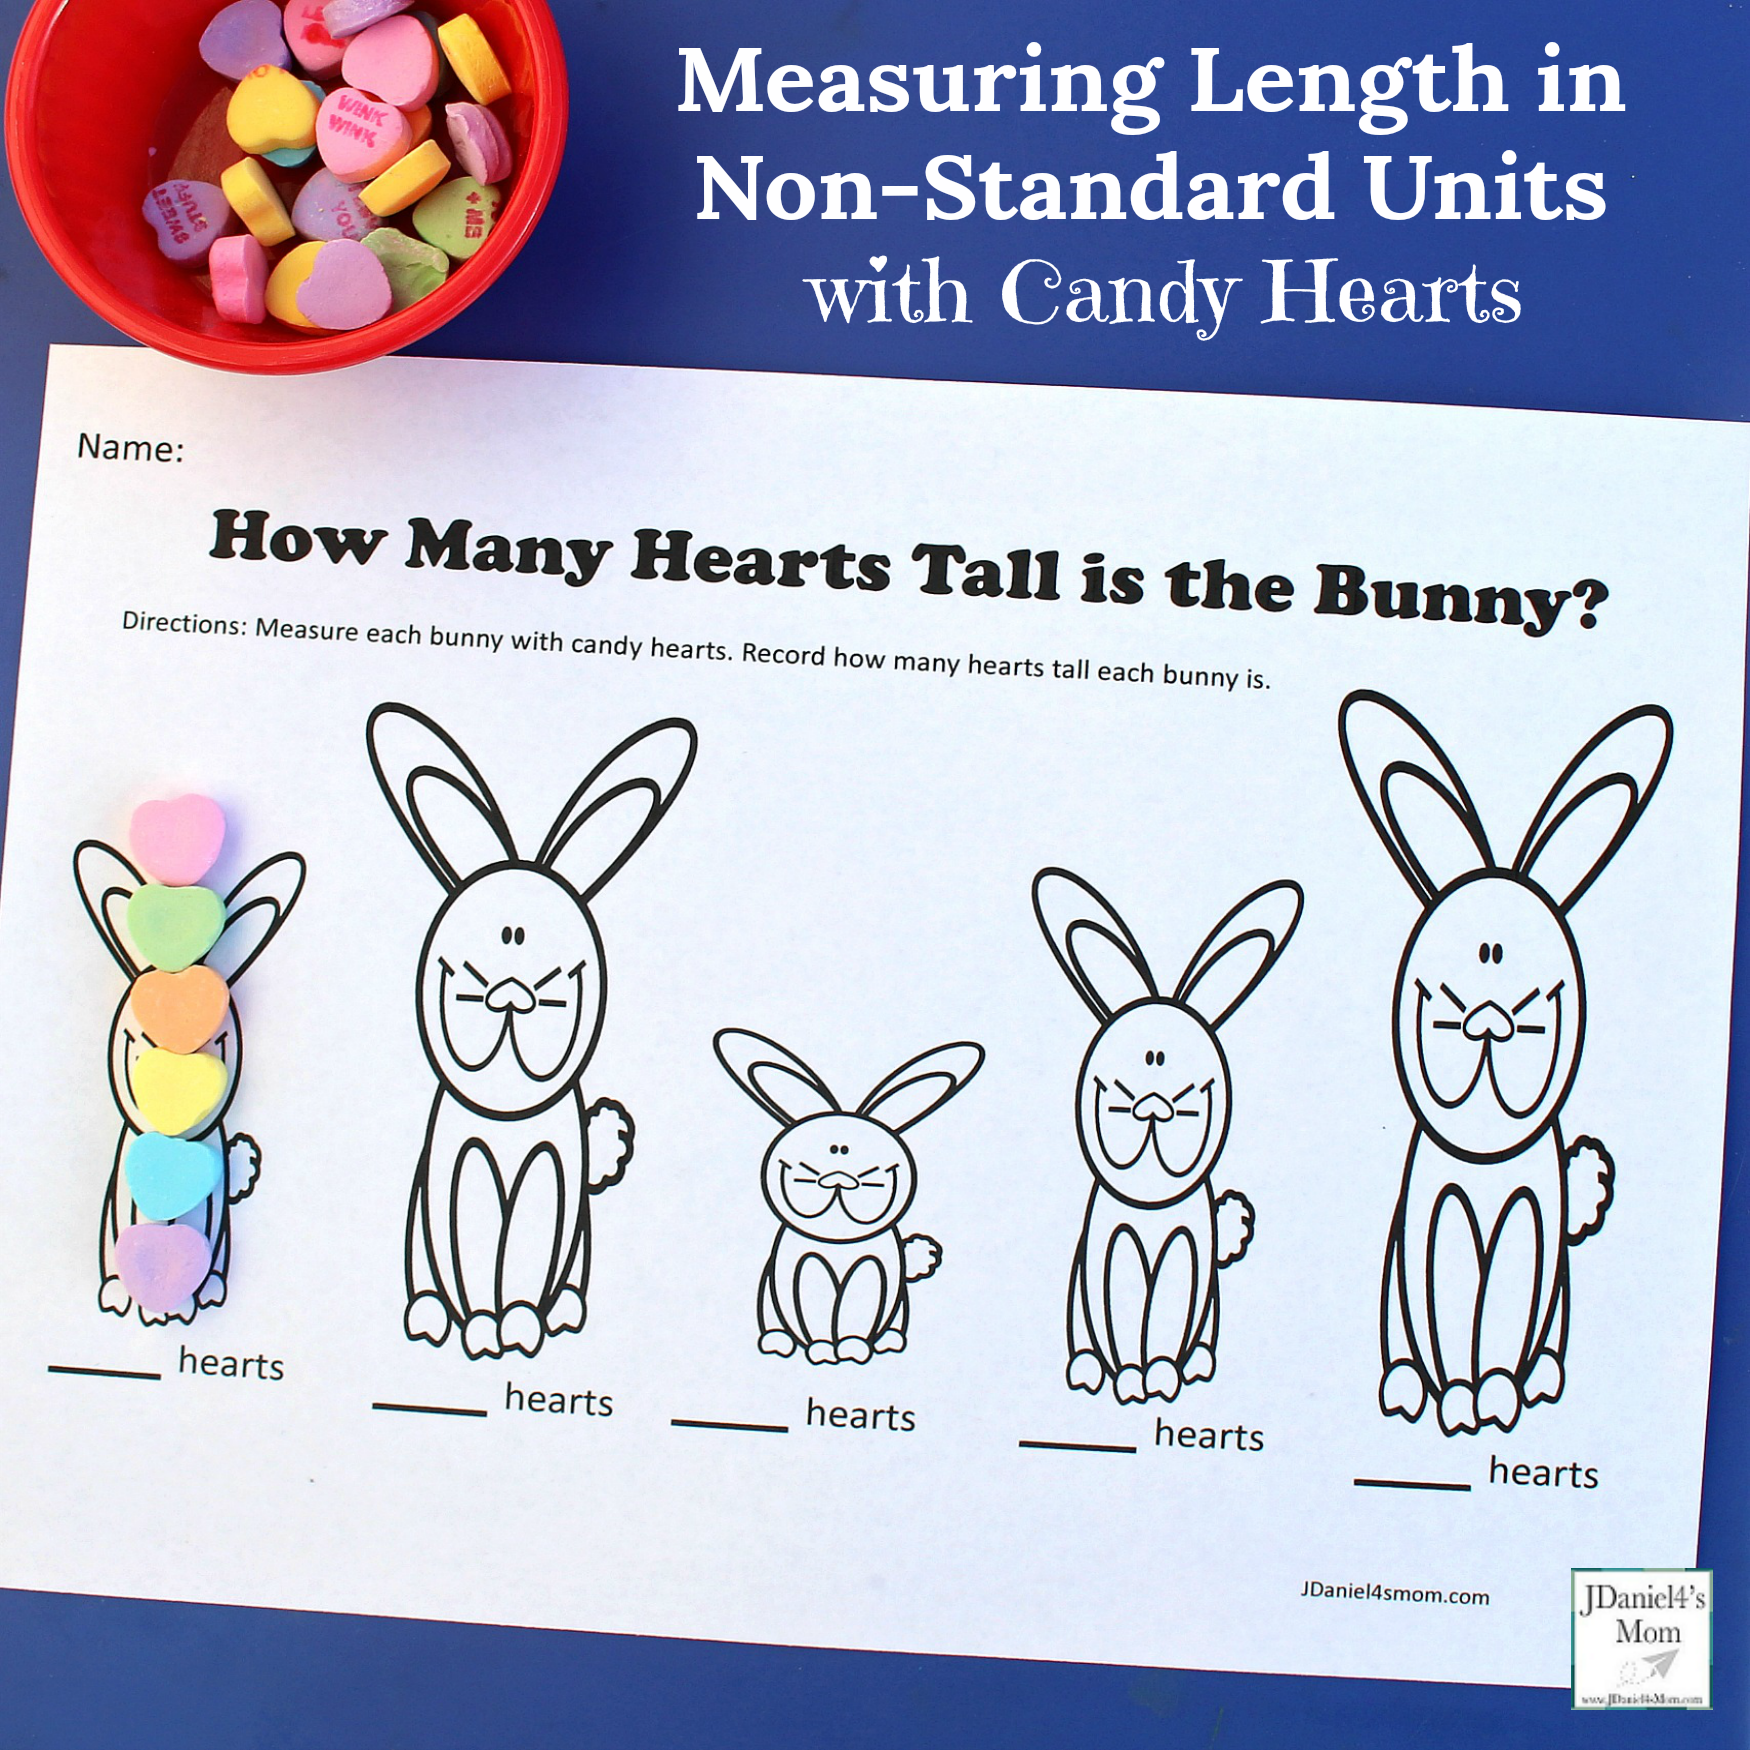 Measuring Length in Non-Standard Units with Candy Hearts - A free set of printables is available.